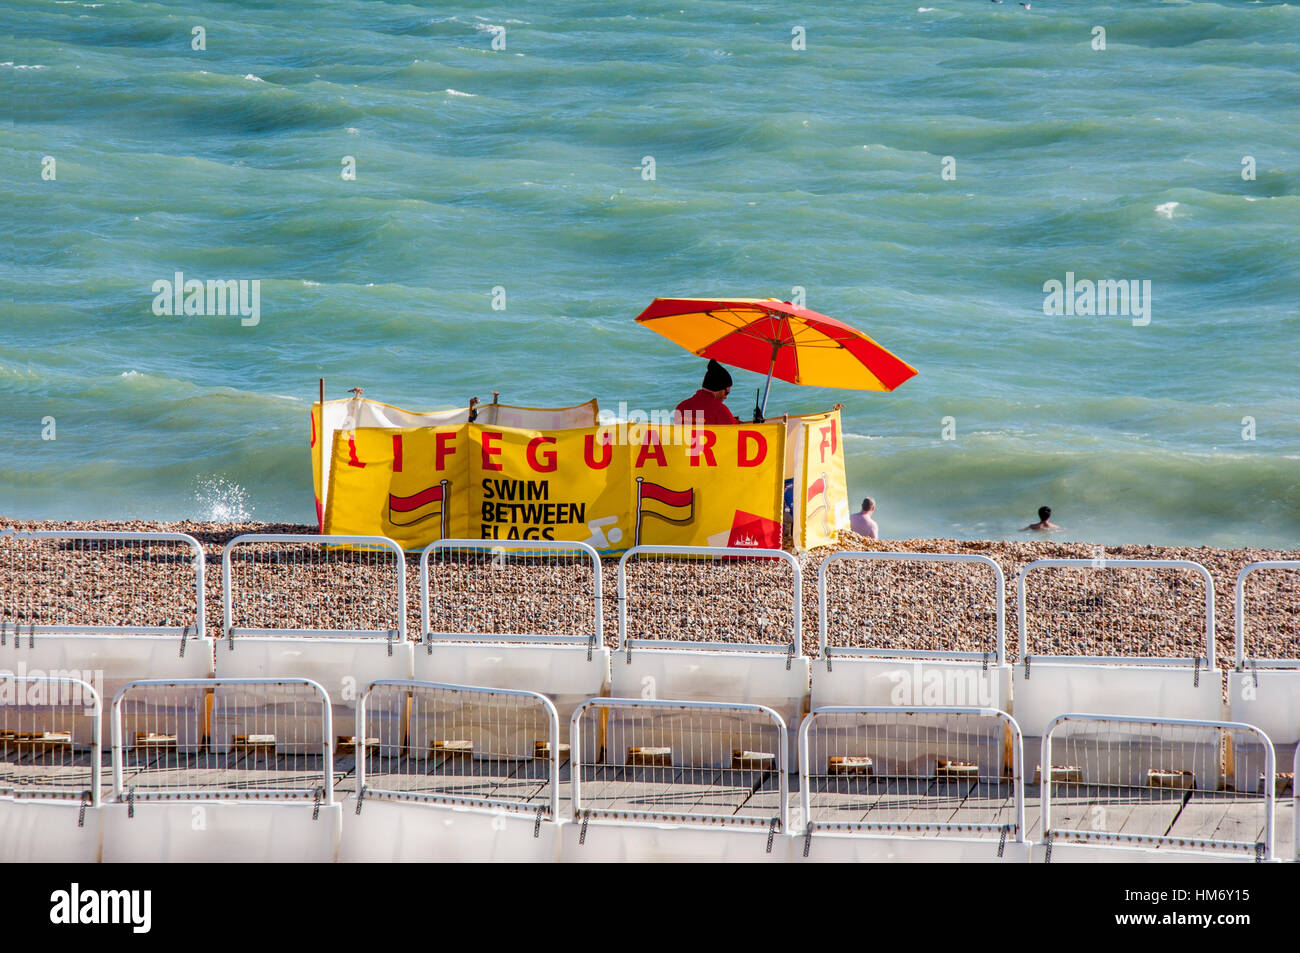 Life guard looking after swimmers in Brighton Stock Photo